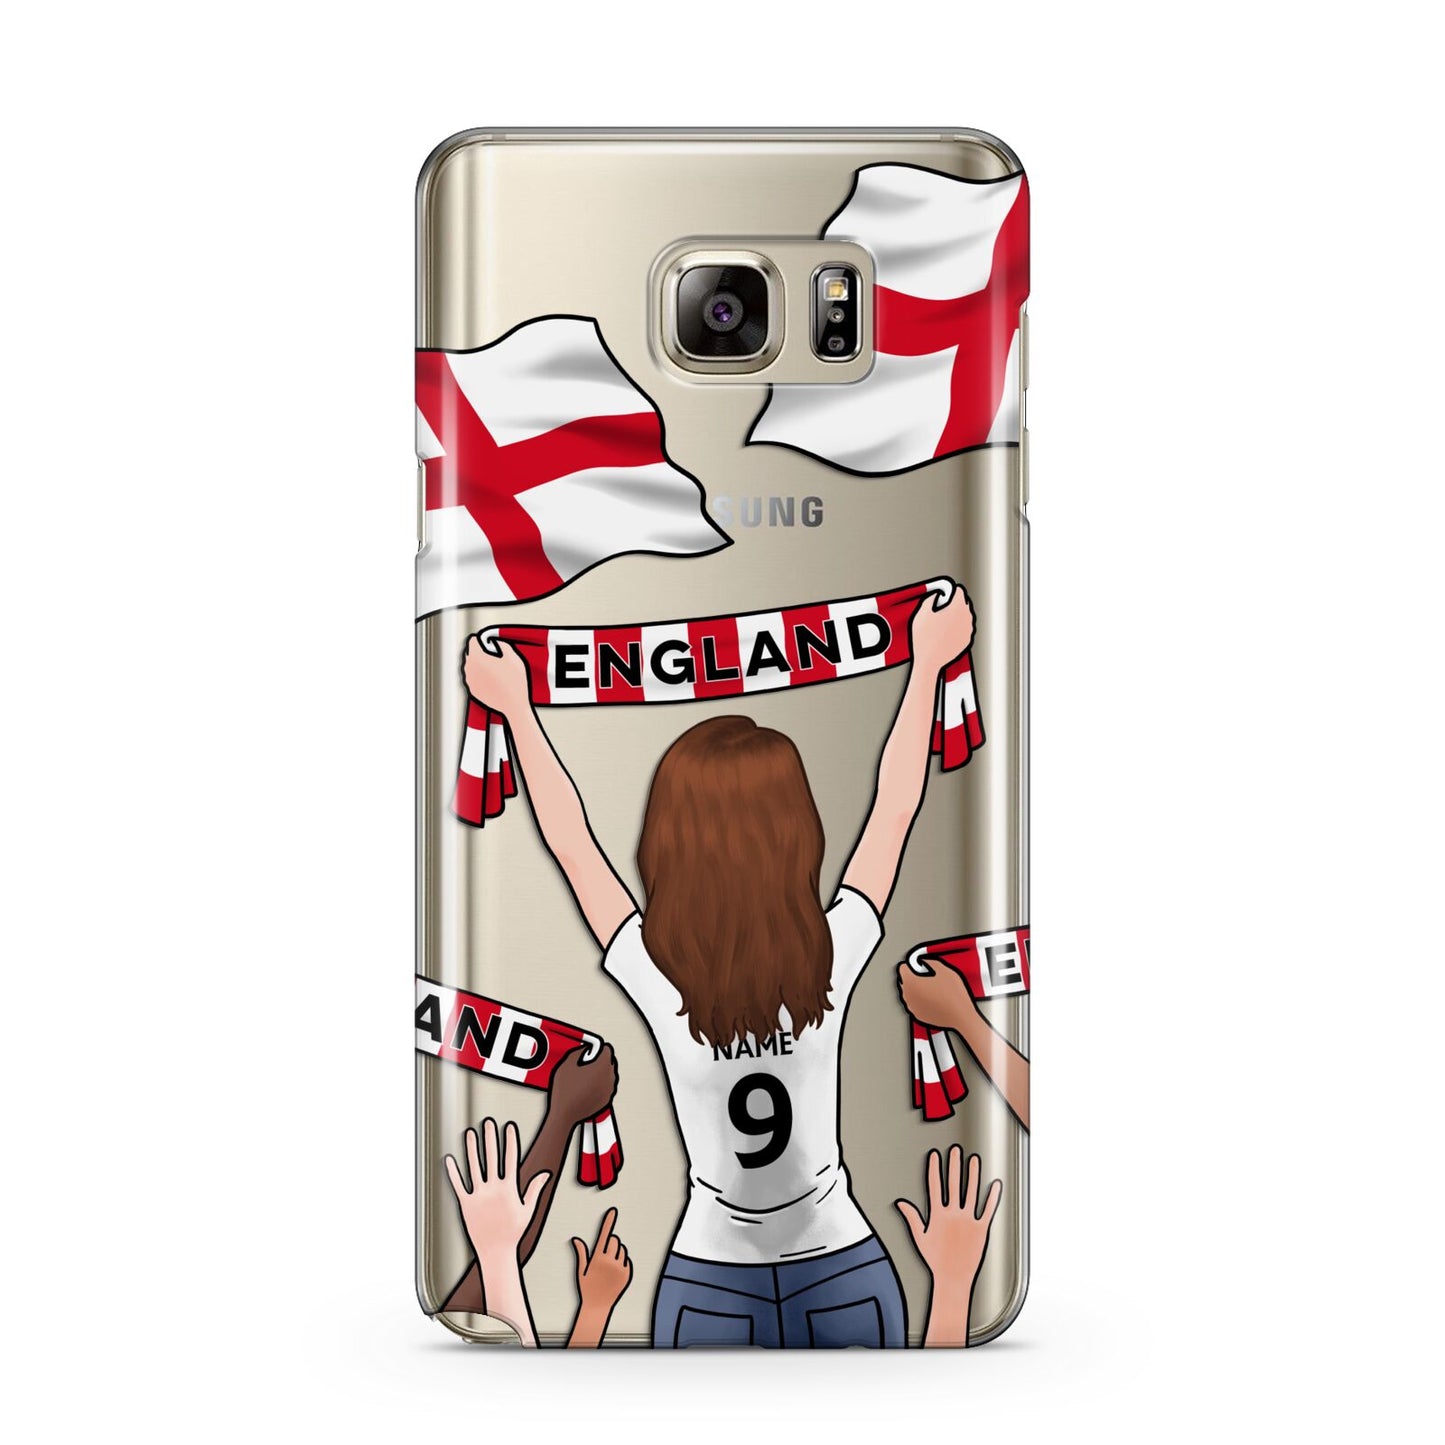 Football Supporter Personalised Samsung Galaxy Note 5 Case